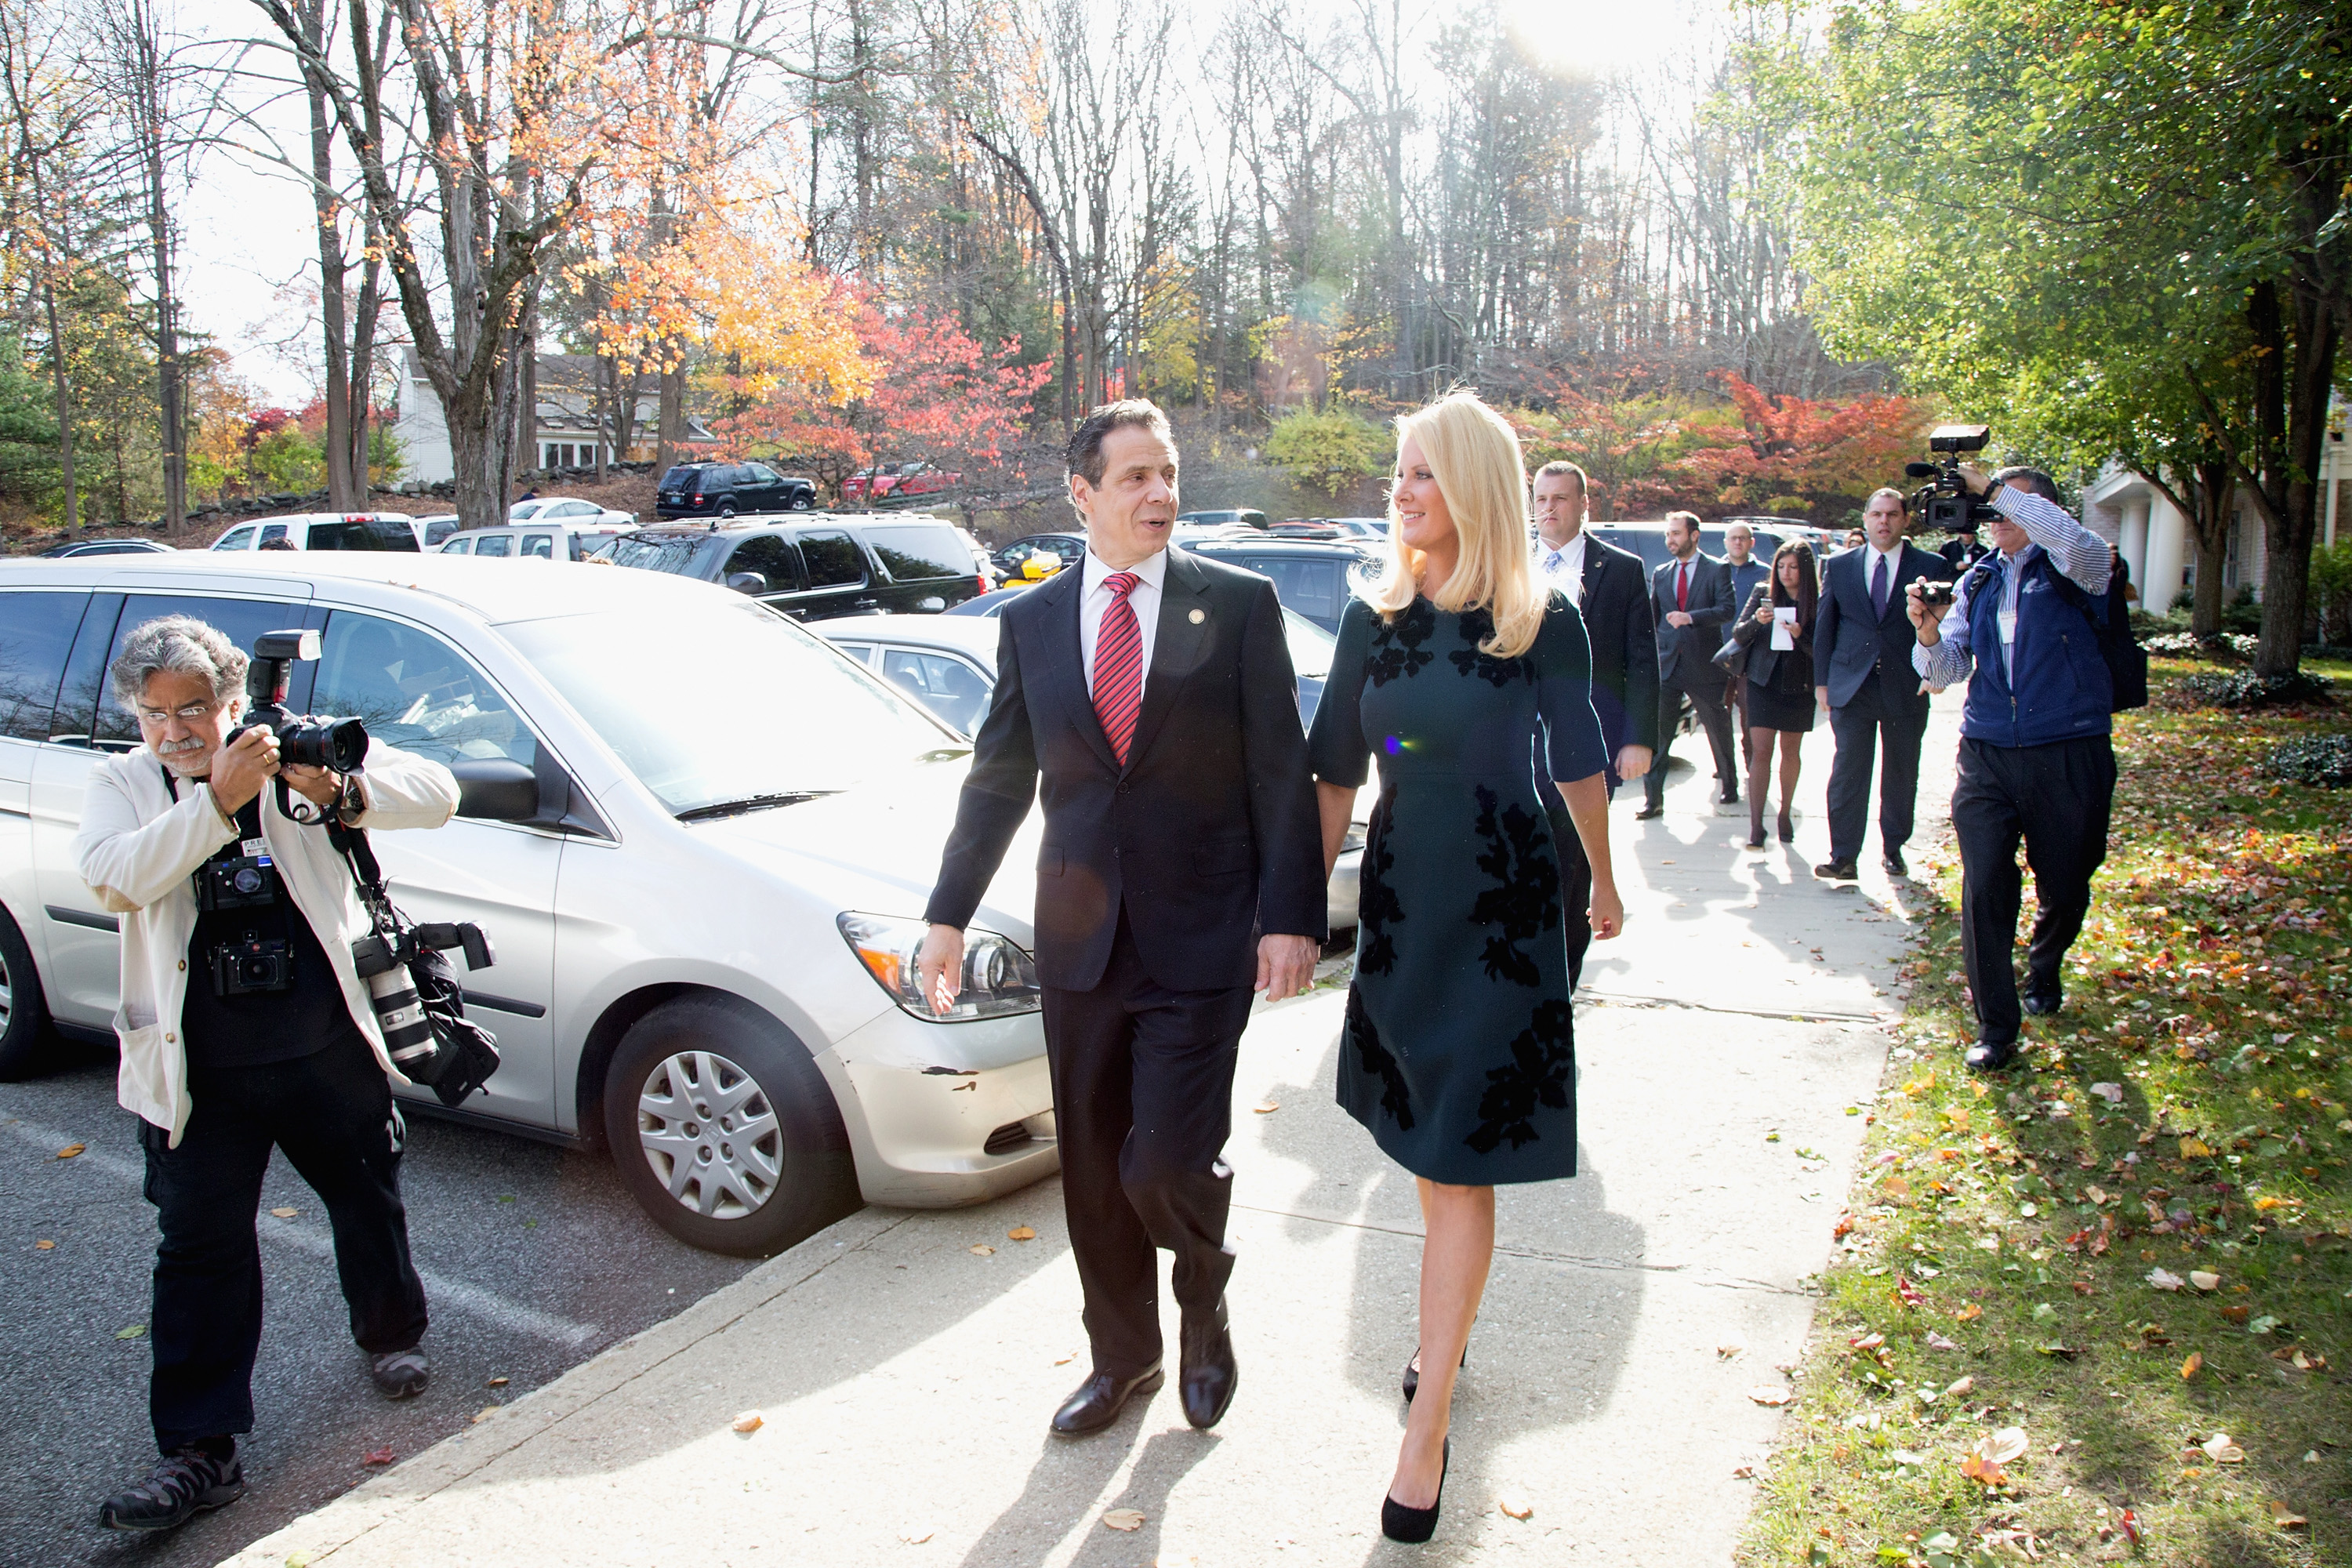 New York State Governor, Andrew Cuomo (L), and his girlfriend, television personality Sandra Lee, arrive to vote during the 2014 general election at the Presbyterian Church of Mount Kisco on November 4, 2014 in Mt Kisco, New York. (Photo by Kenneth Gabrielsen/Getty Images)